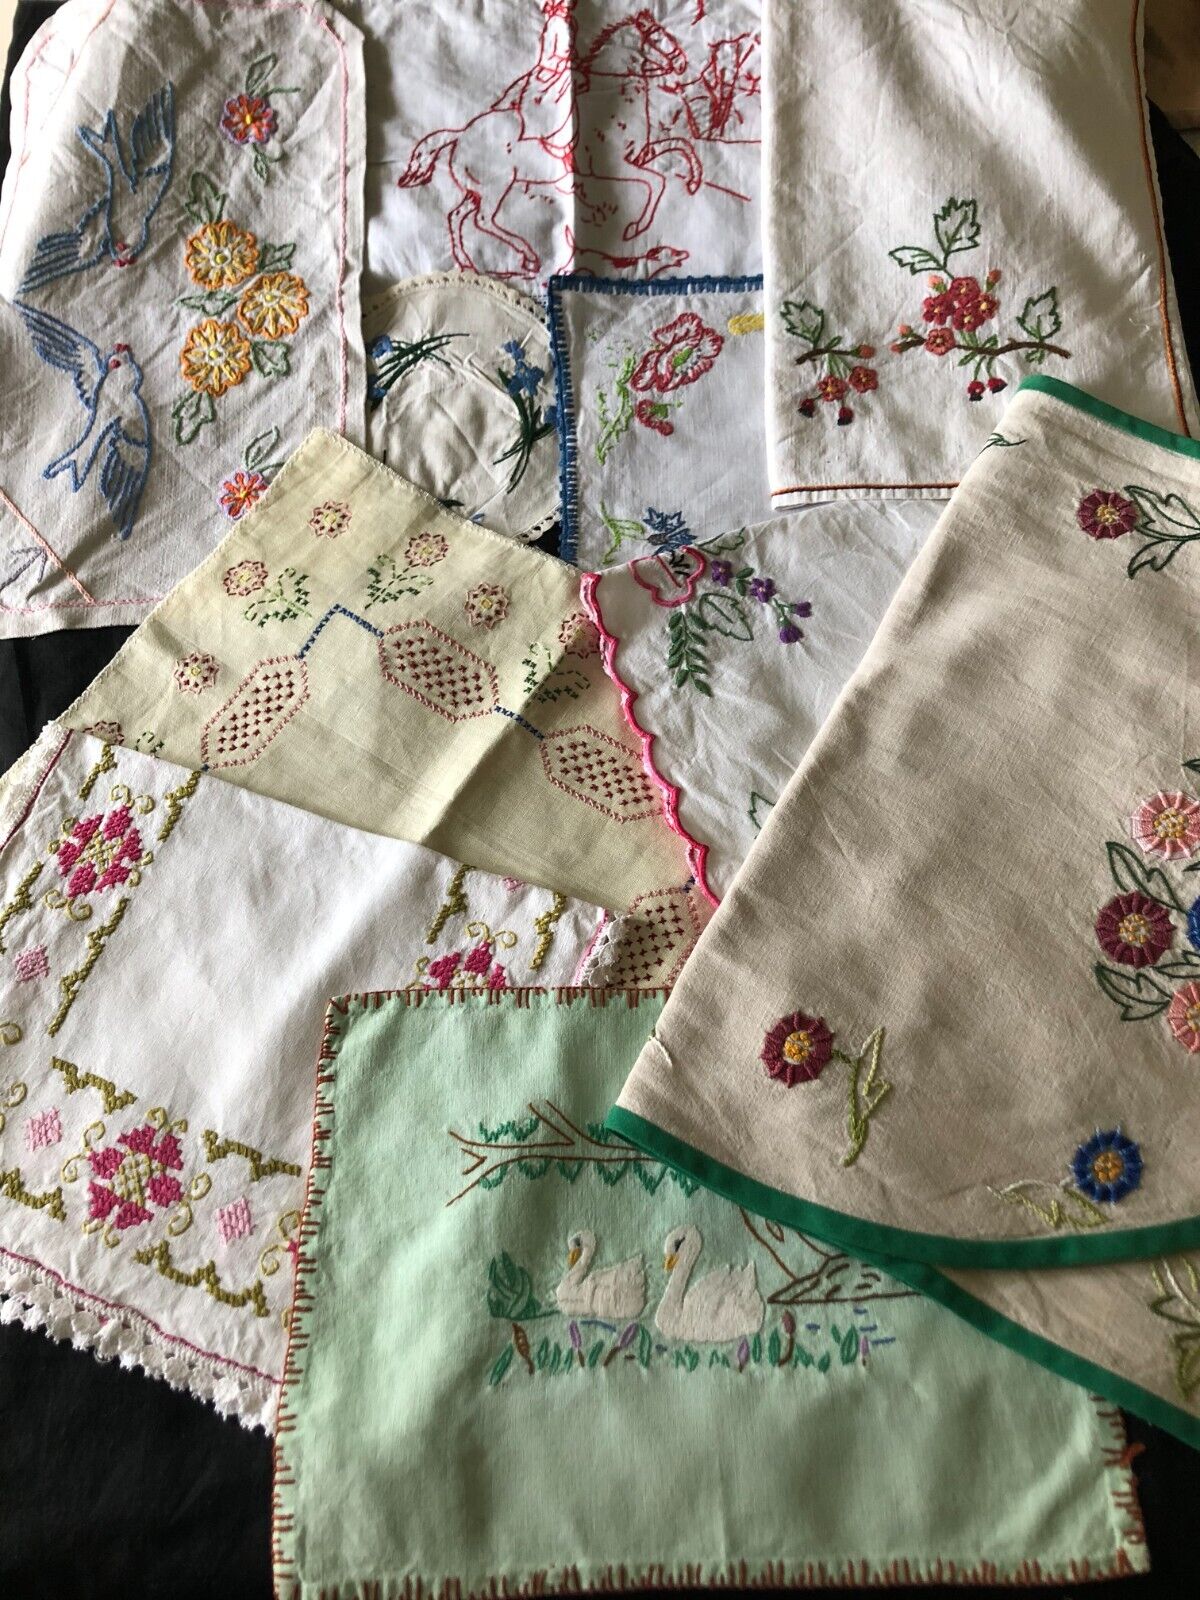 Job Lot Pretty 10 Vintage French Teatime Hand Embroidered Table Cloths c1940/50s